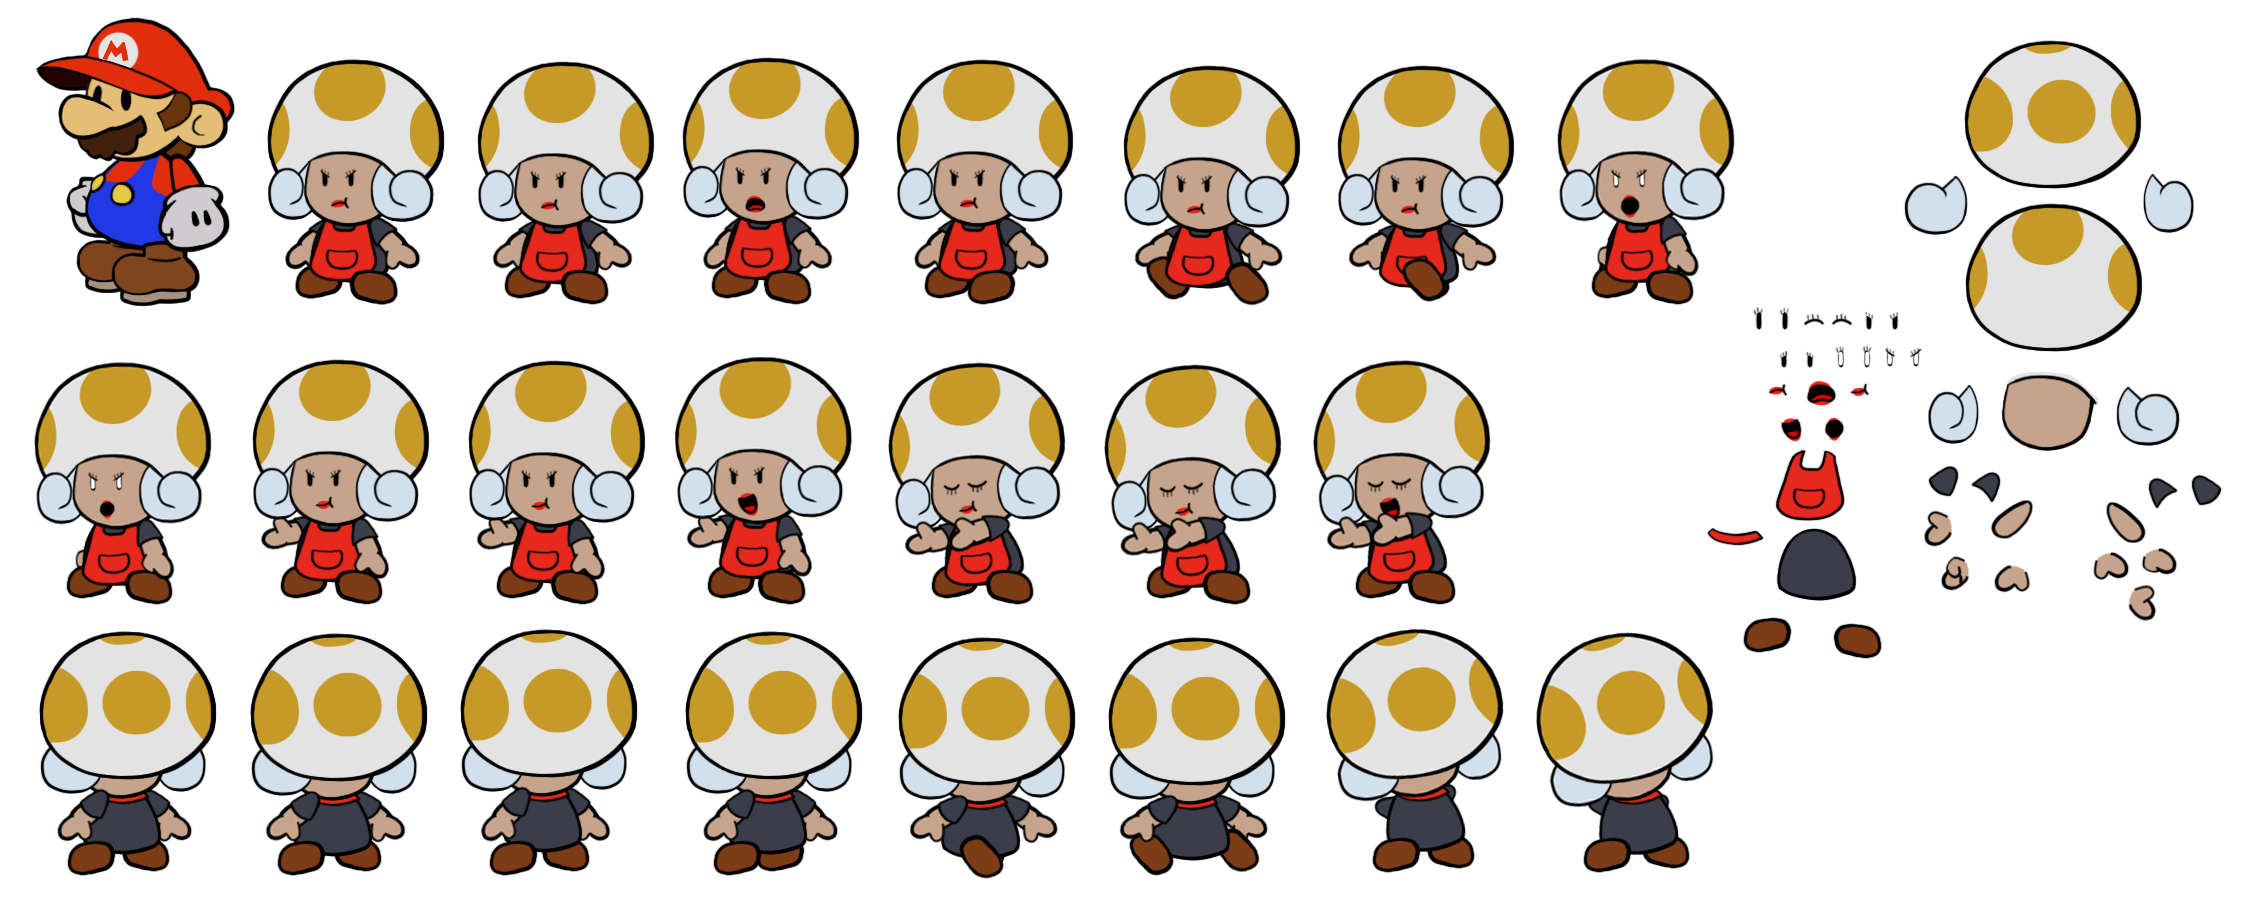 Zess T. (Paper Mario-Style)